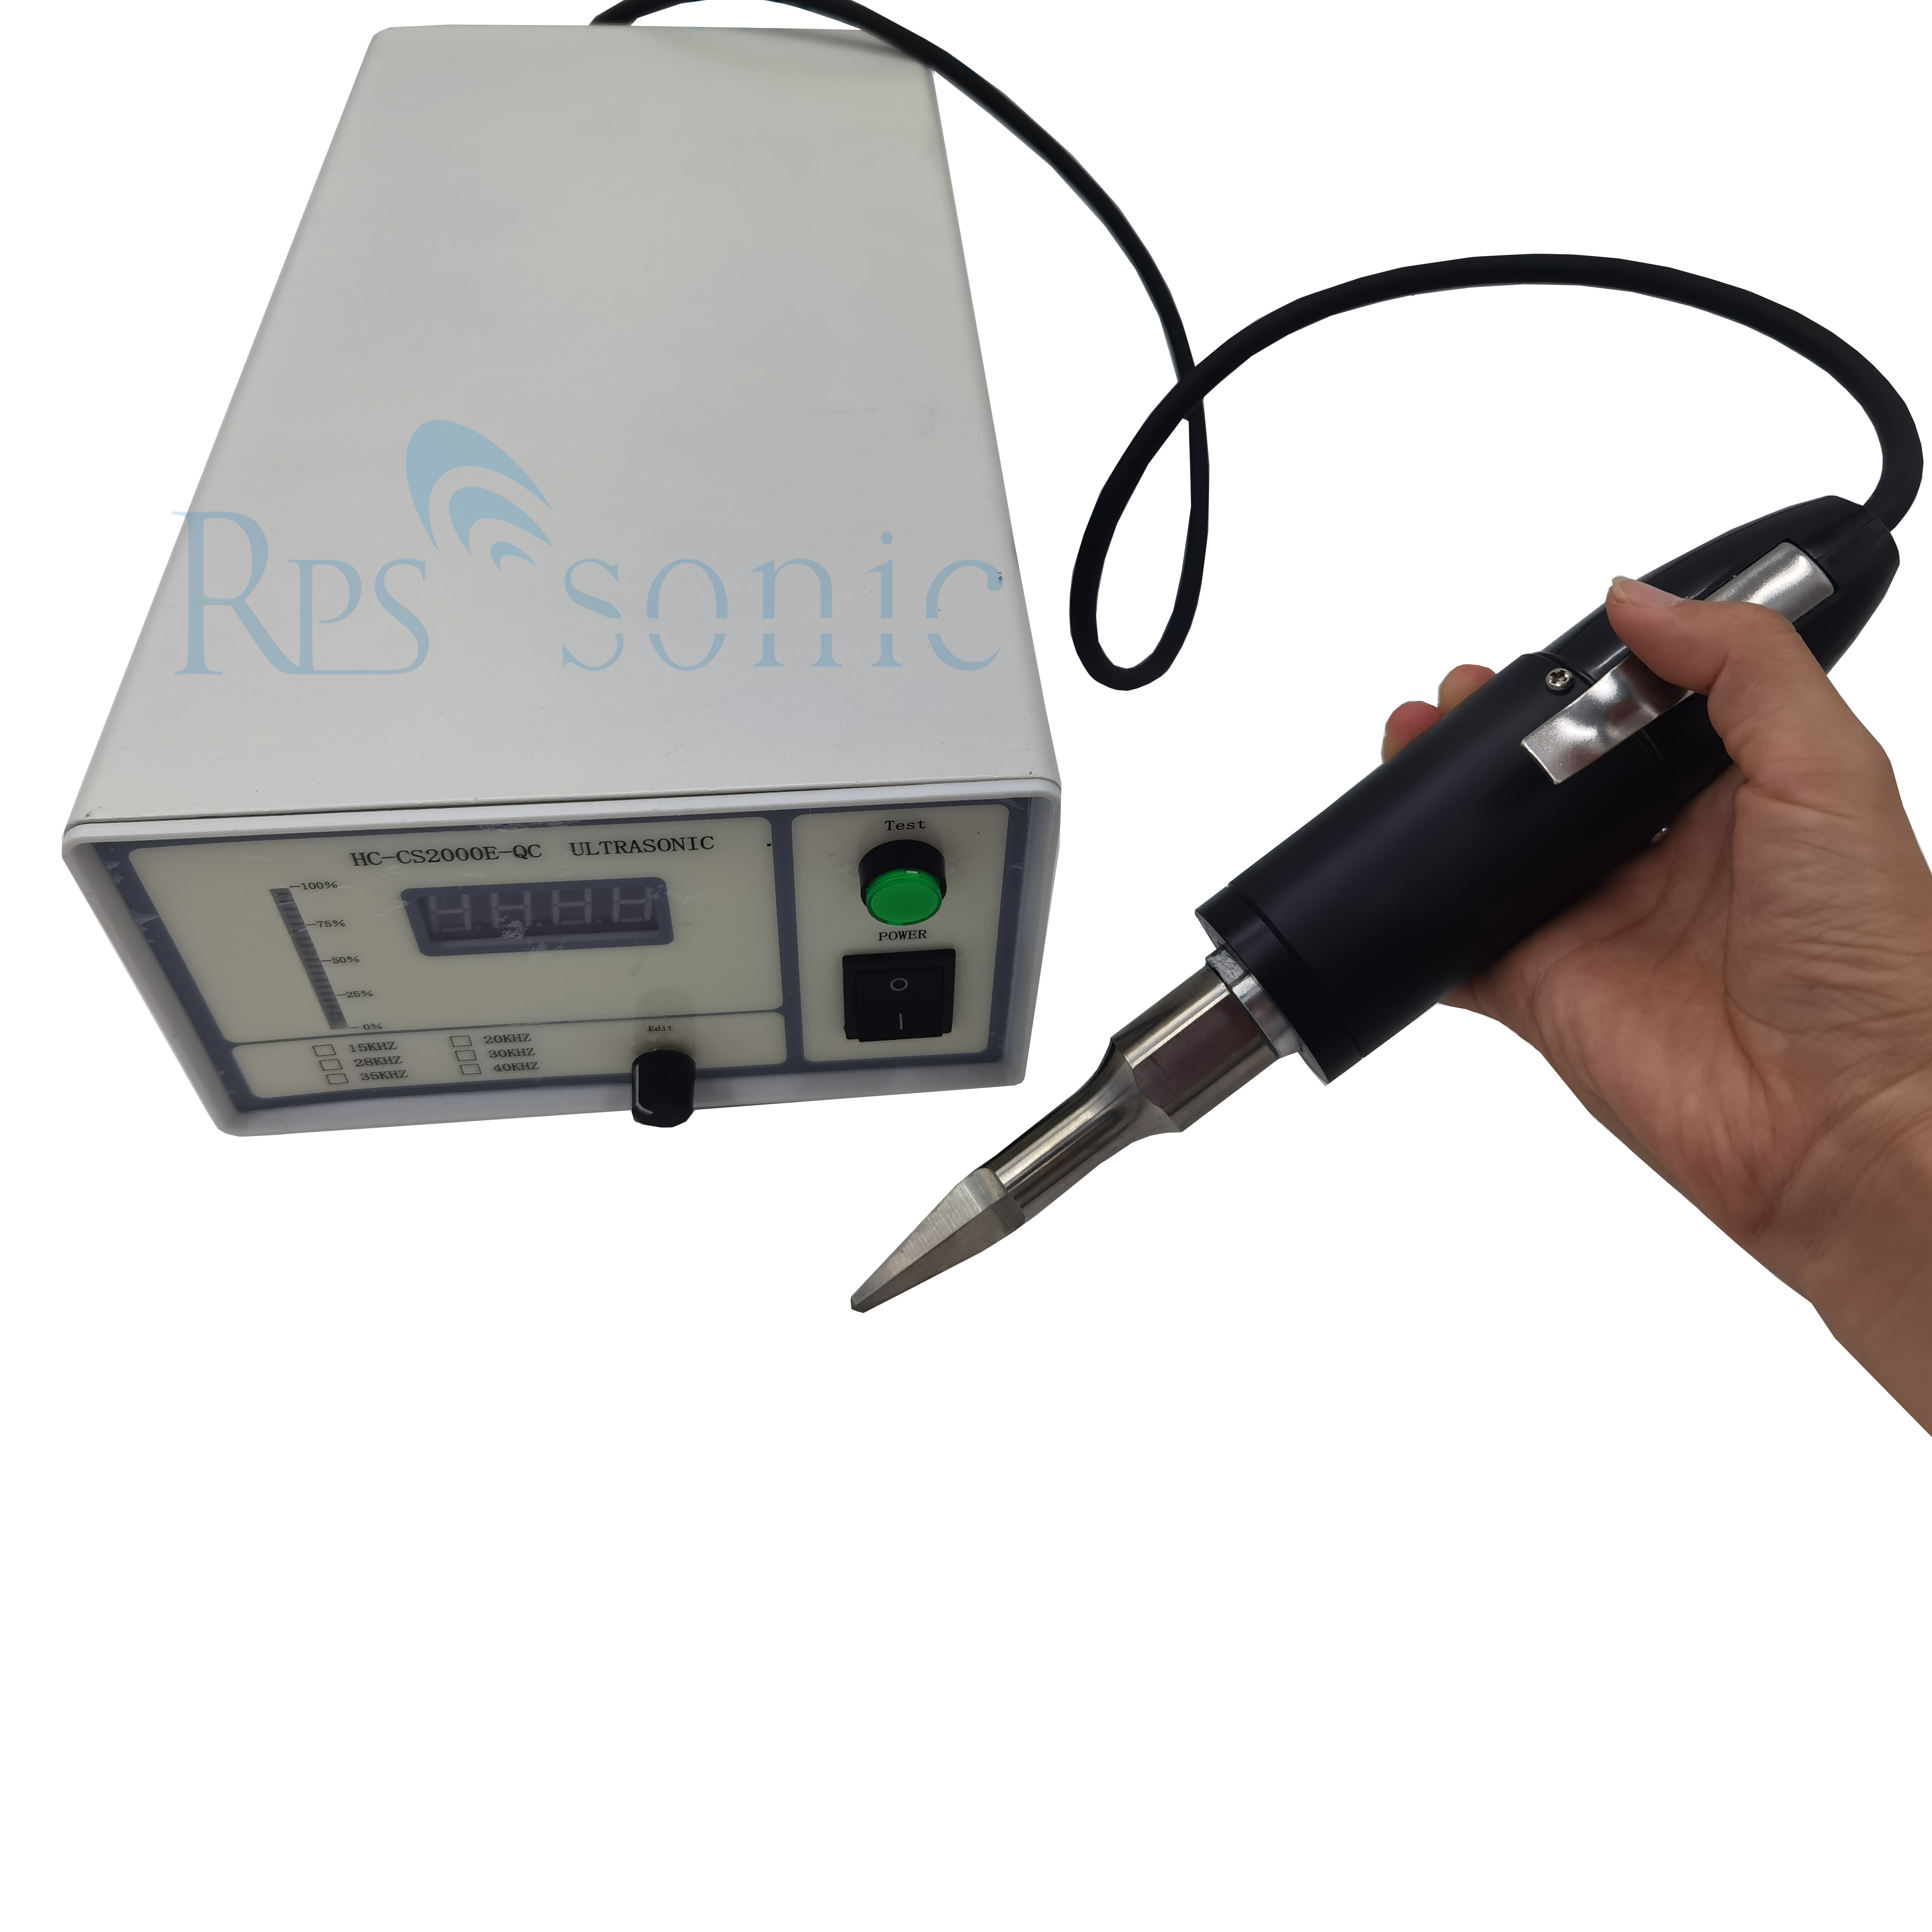 China Handheld Ultrasonic Cutter Suppliers, Manufacturers - Best